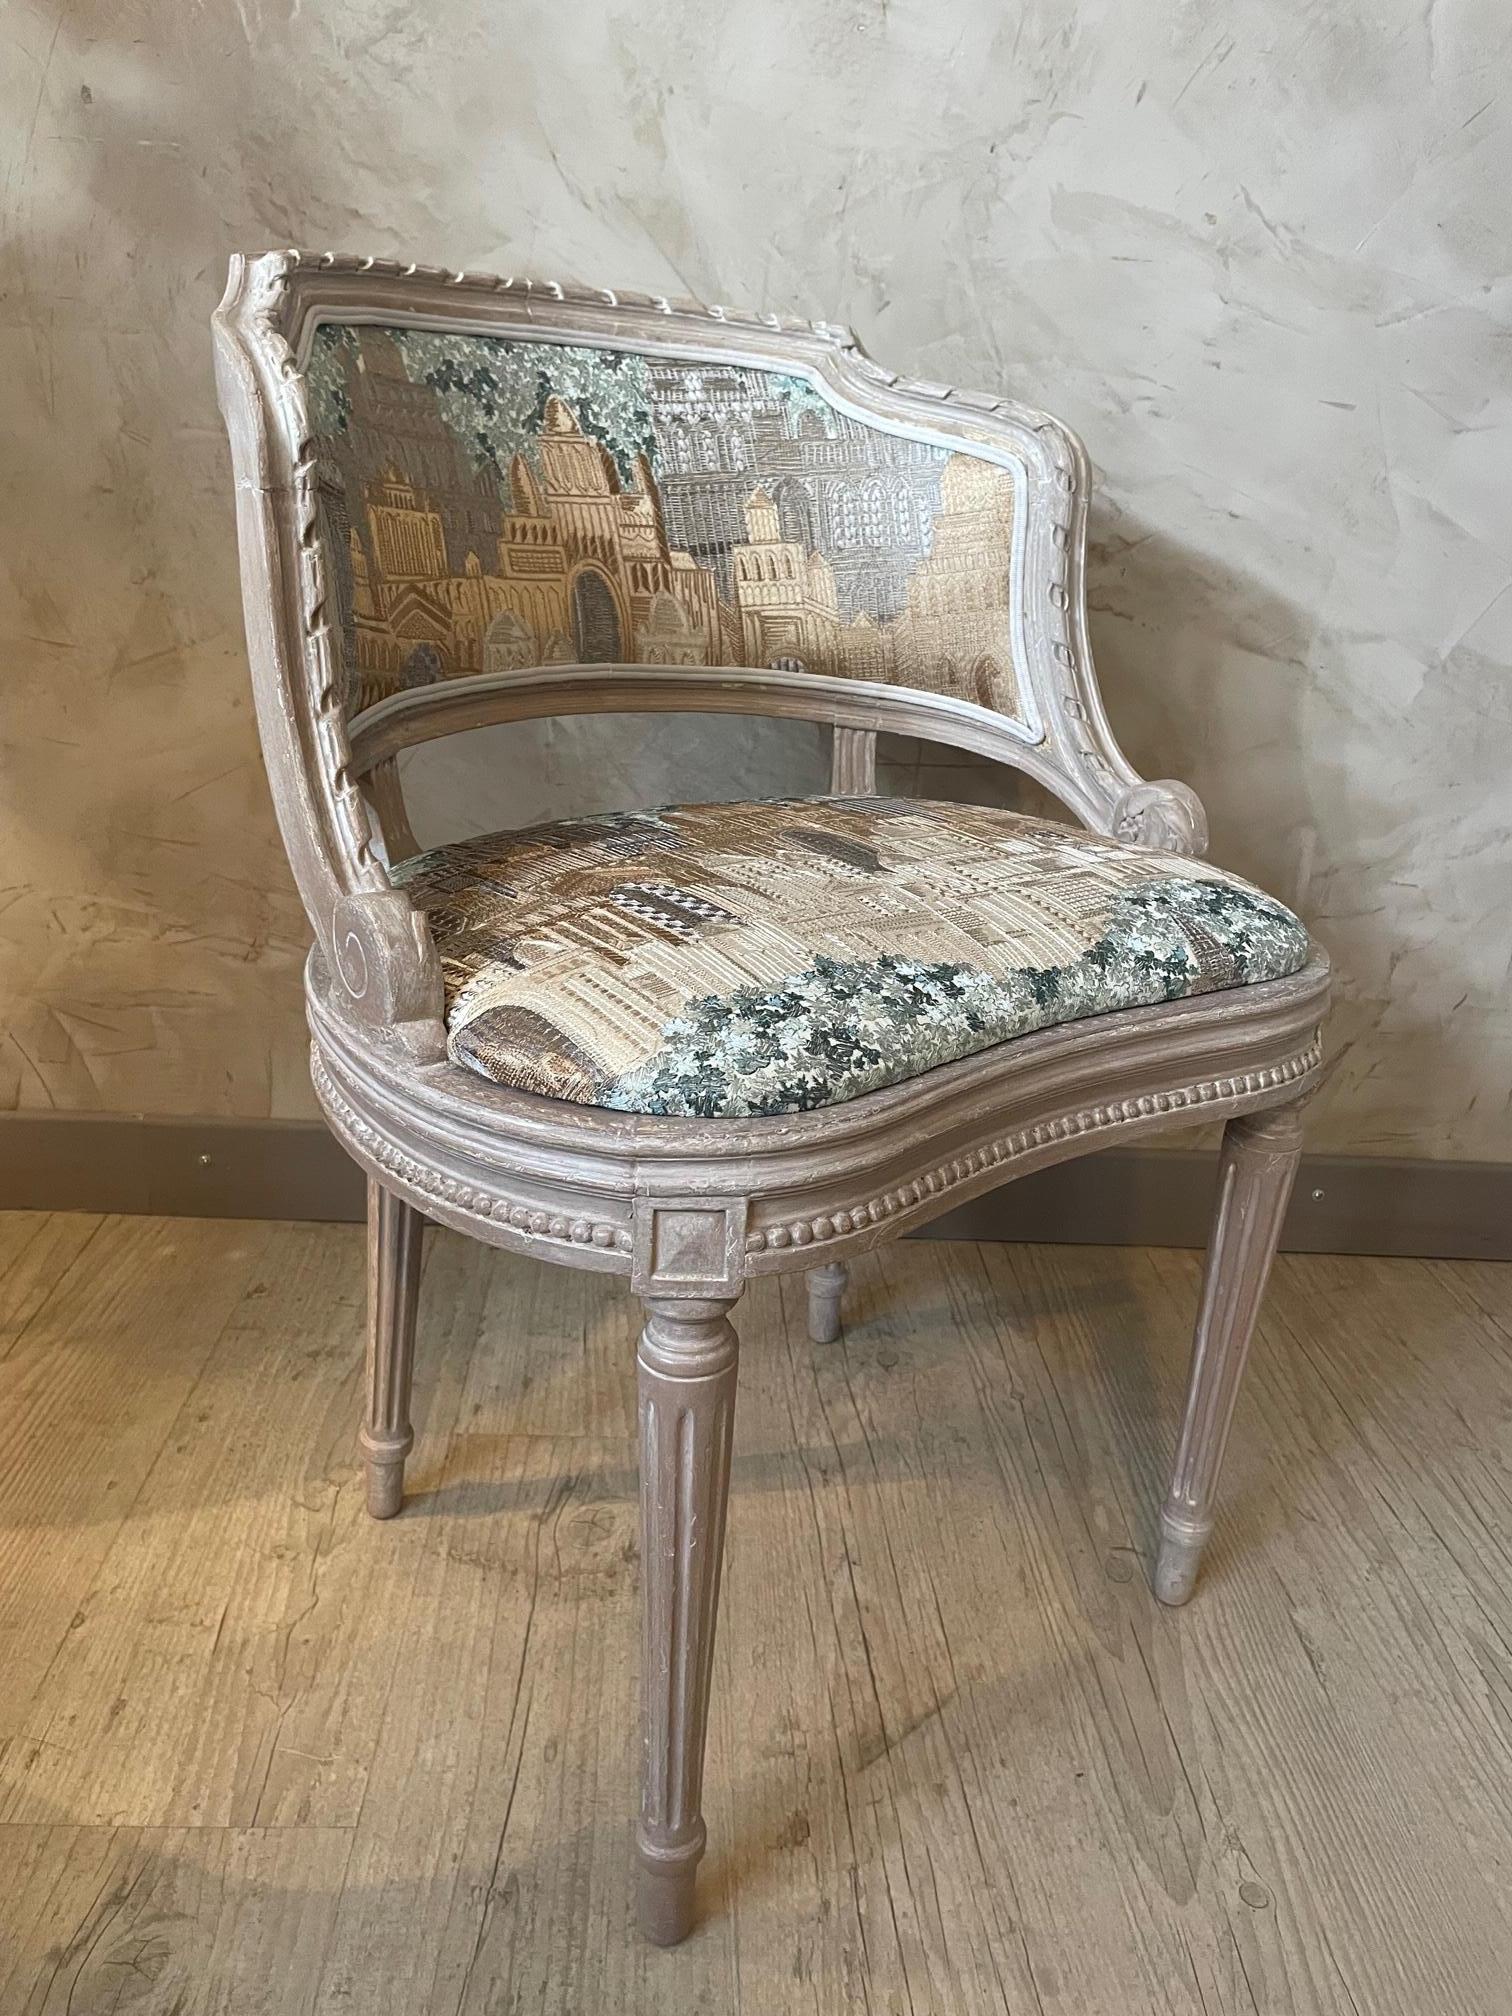 Beautiful Early 20th century French Louis XVI style chair. 
Has been reupholstered by an upholsterer professional meticulously with a high quality of fabric made by the French house Thevenon. 
The wood has been cleaned, sanded and painted with a